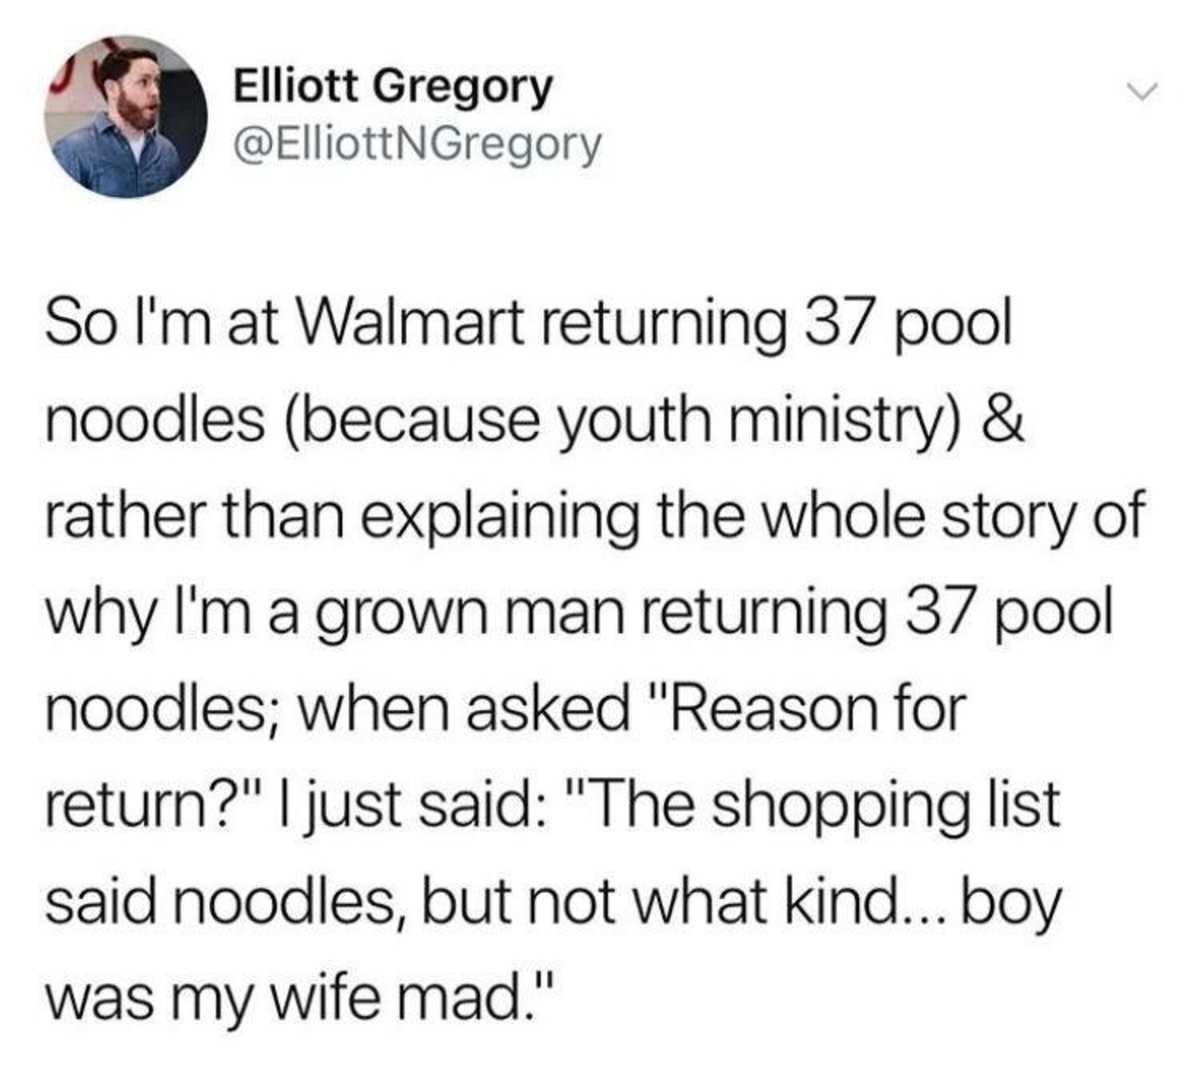 Noodles. .. I'm confused. Did the wife want him to buy 37 packs of noodles for a church potluck and he bought pool noodles on accident thinking they were for a lesson, or d